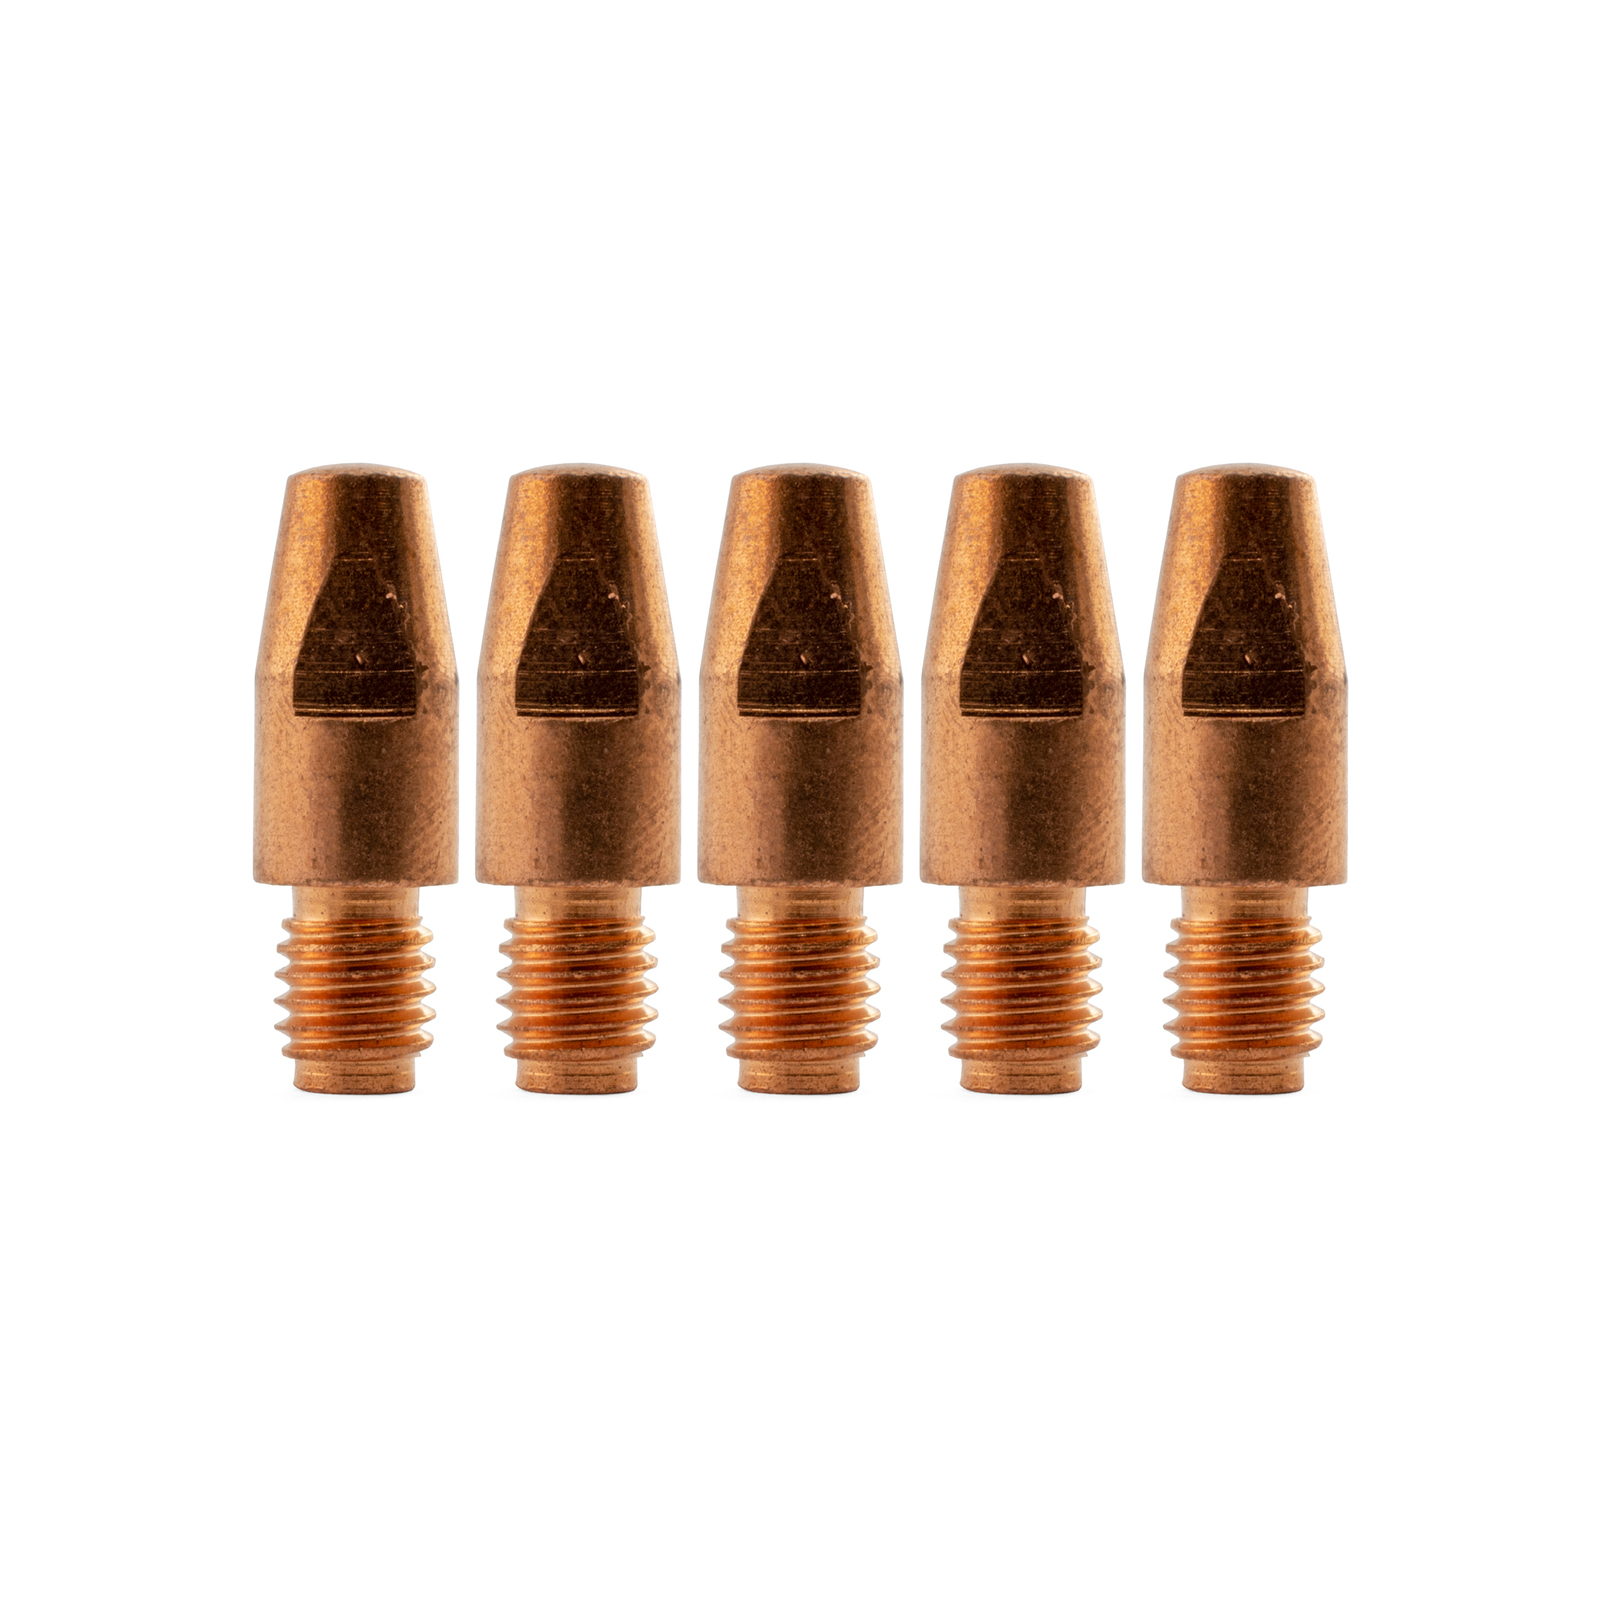 Binzel Style MIG Contact Tips 1.2mm - 5 pack - M8 x 10mm x 1.2mm